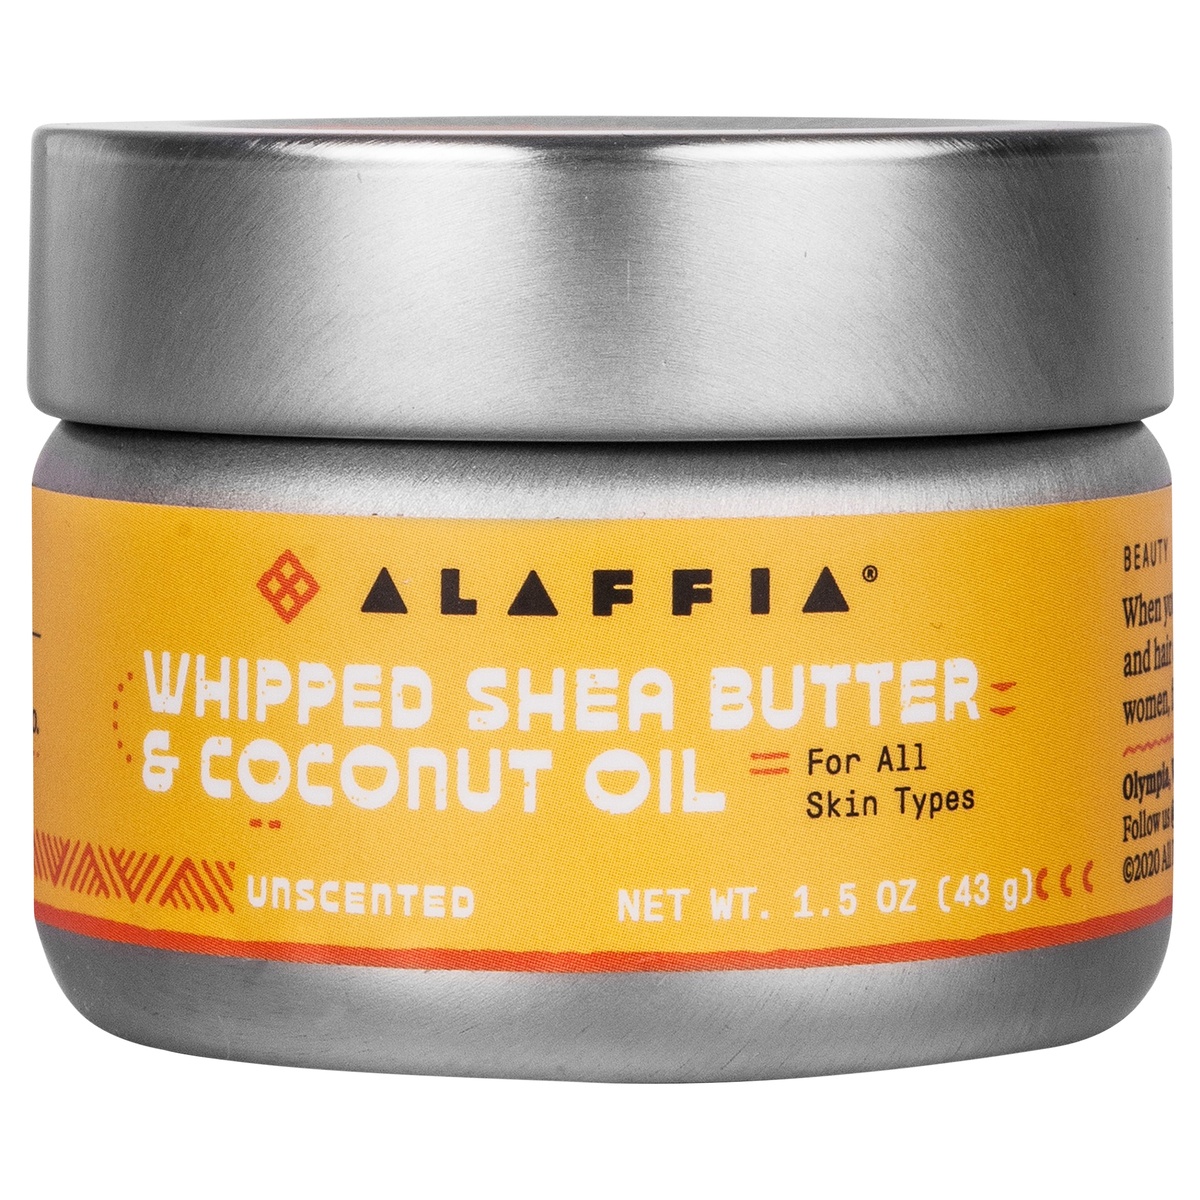 slide 7 of 7, Alaffia Unscented Whipped Shea Butter and Coconut Oil, 1.5 oz